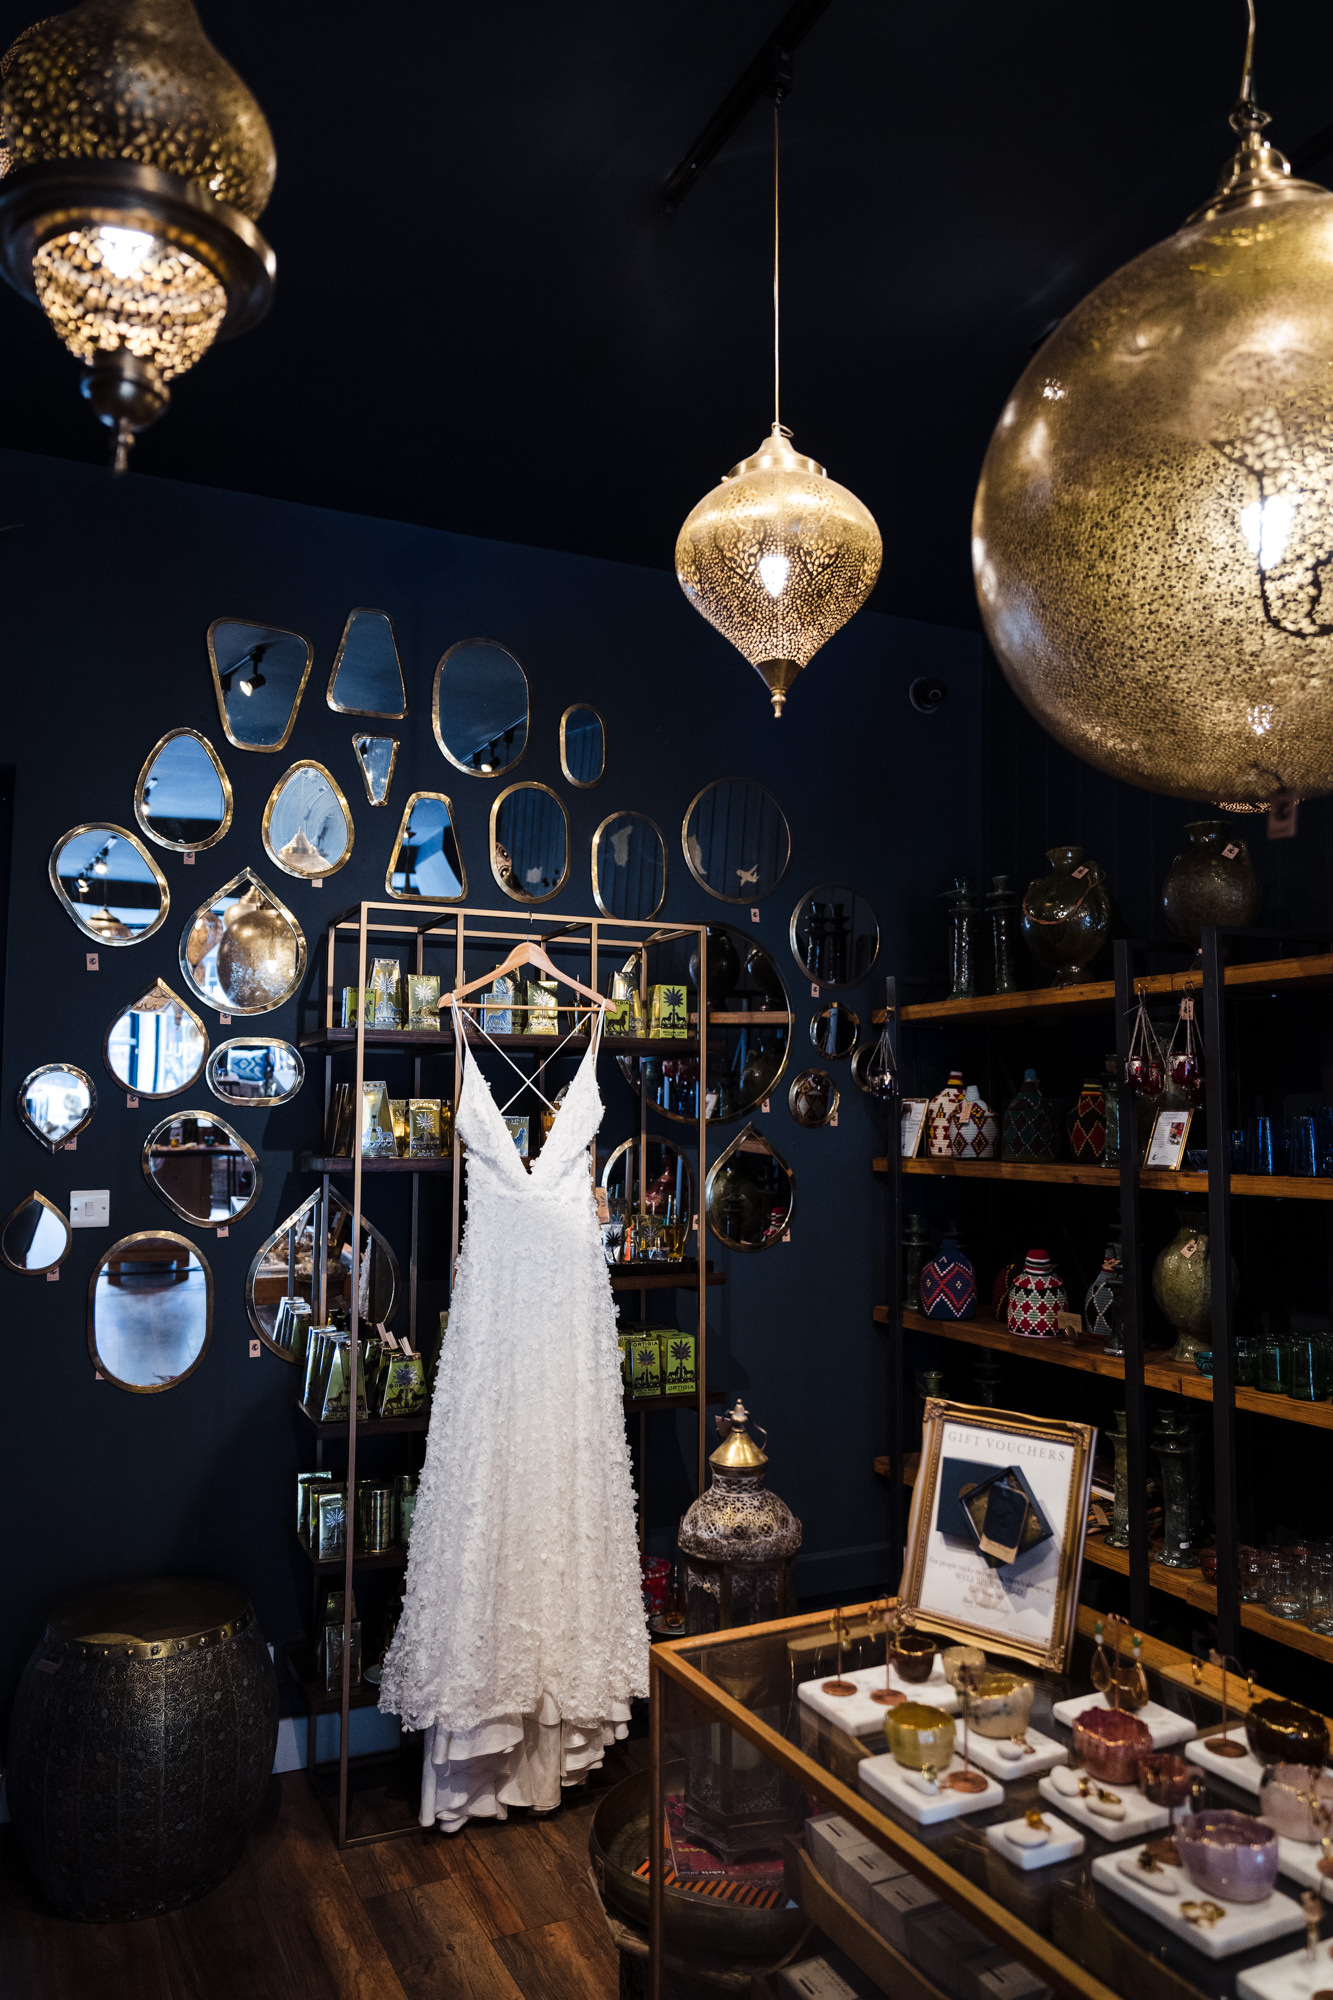 a Charlie Brear luxury wedding dress hangs in a room full of mirrors and gold lamp shades